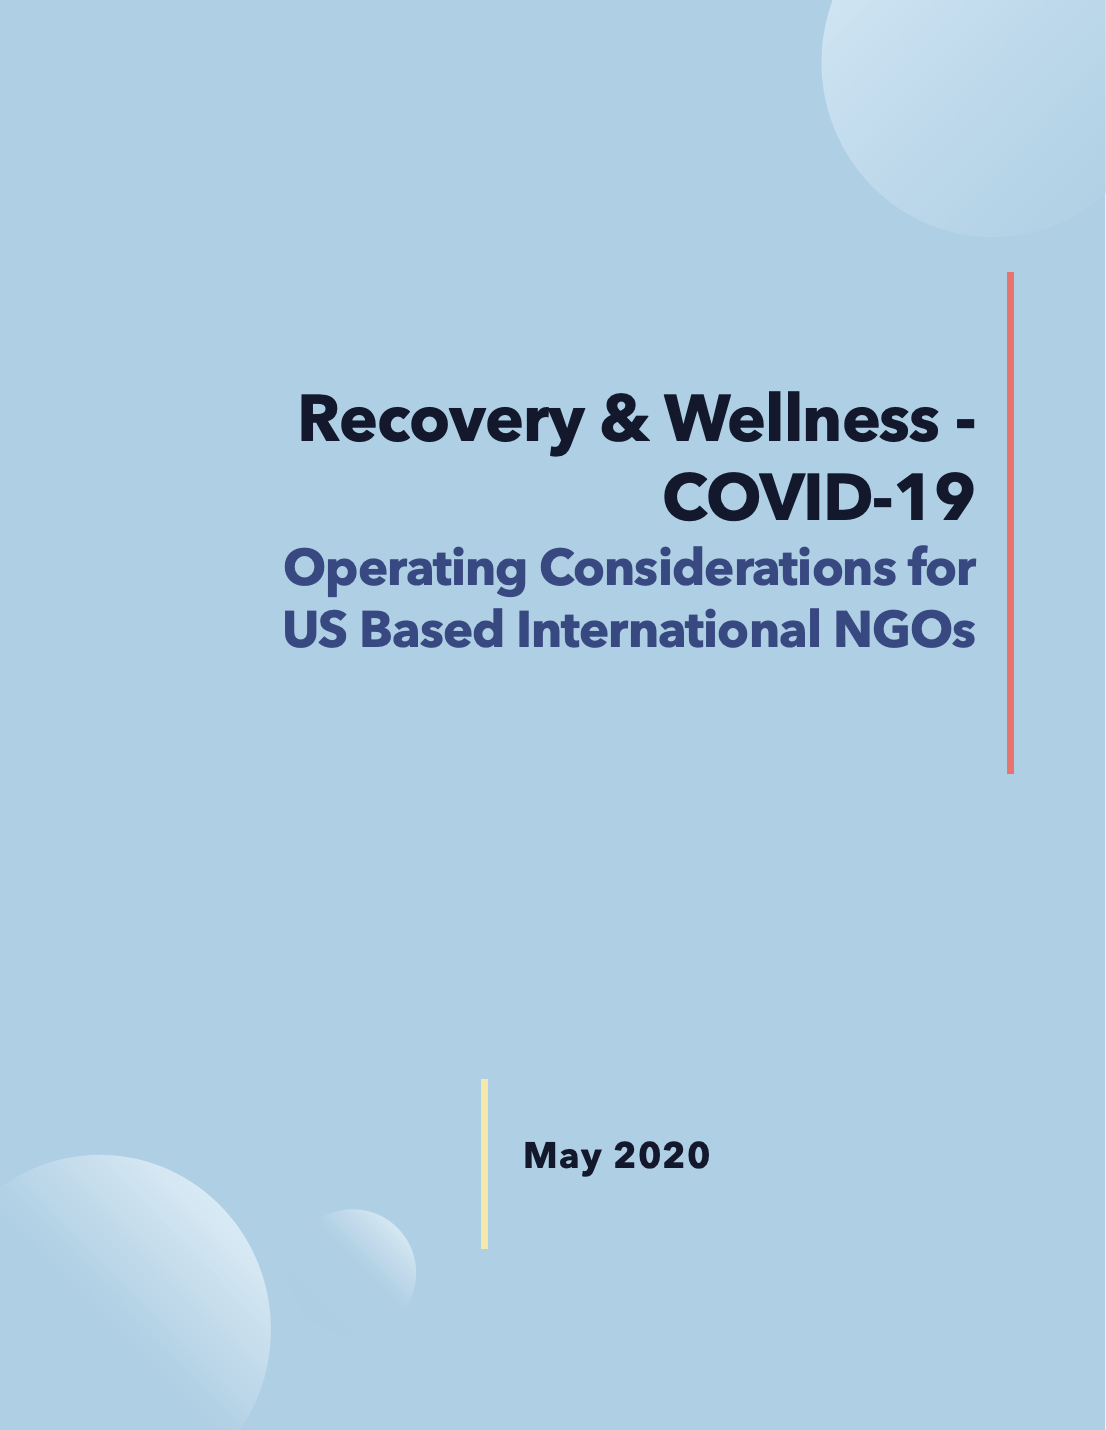 Recovery & Wellness, COVID-19: Operating Considerations for US Based International NGOs